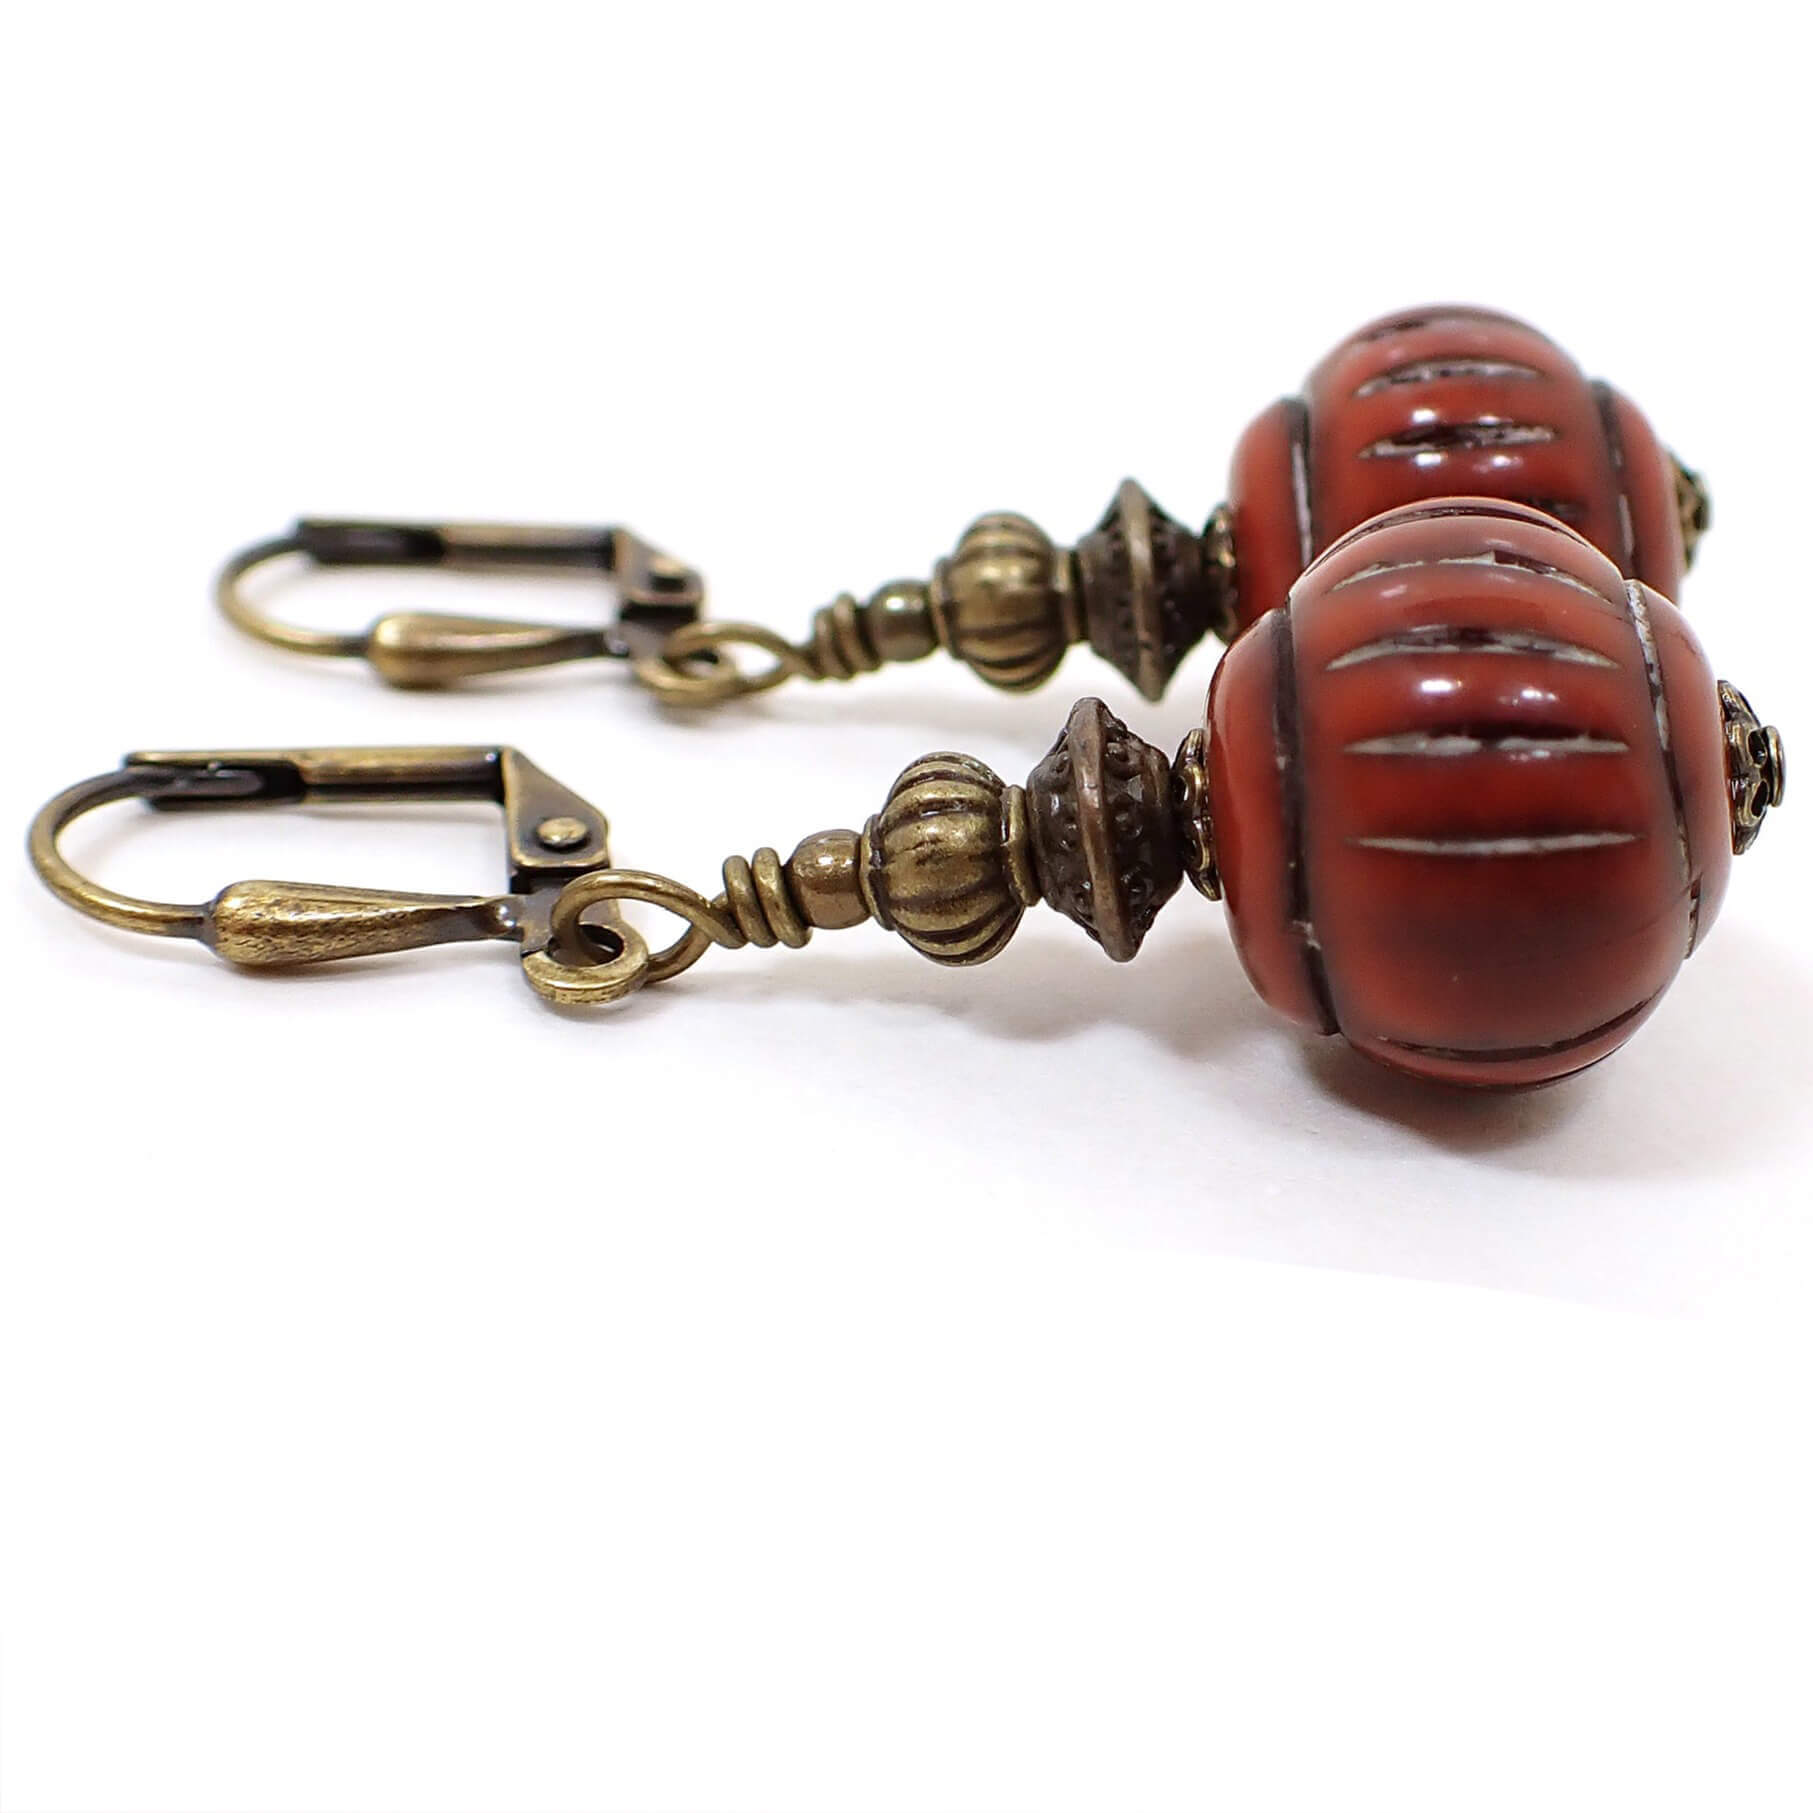 Side view of the handmade drop earrings. The metal is antiqued brass in color. There are lantern shaped lucite beads on the bottom that have a carved like line design. The beads are a dark cinnamon red in color.